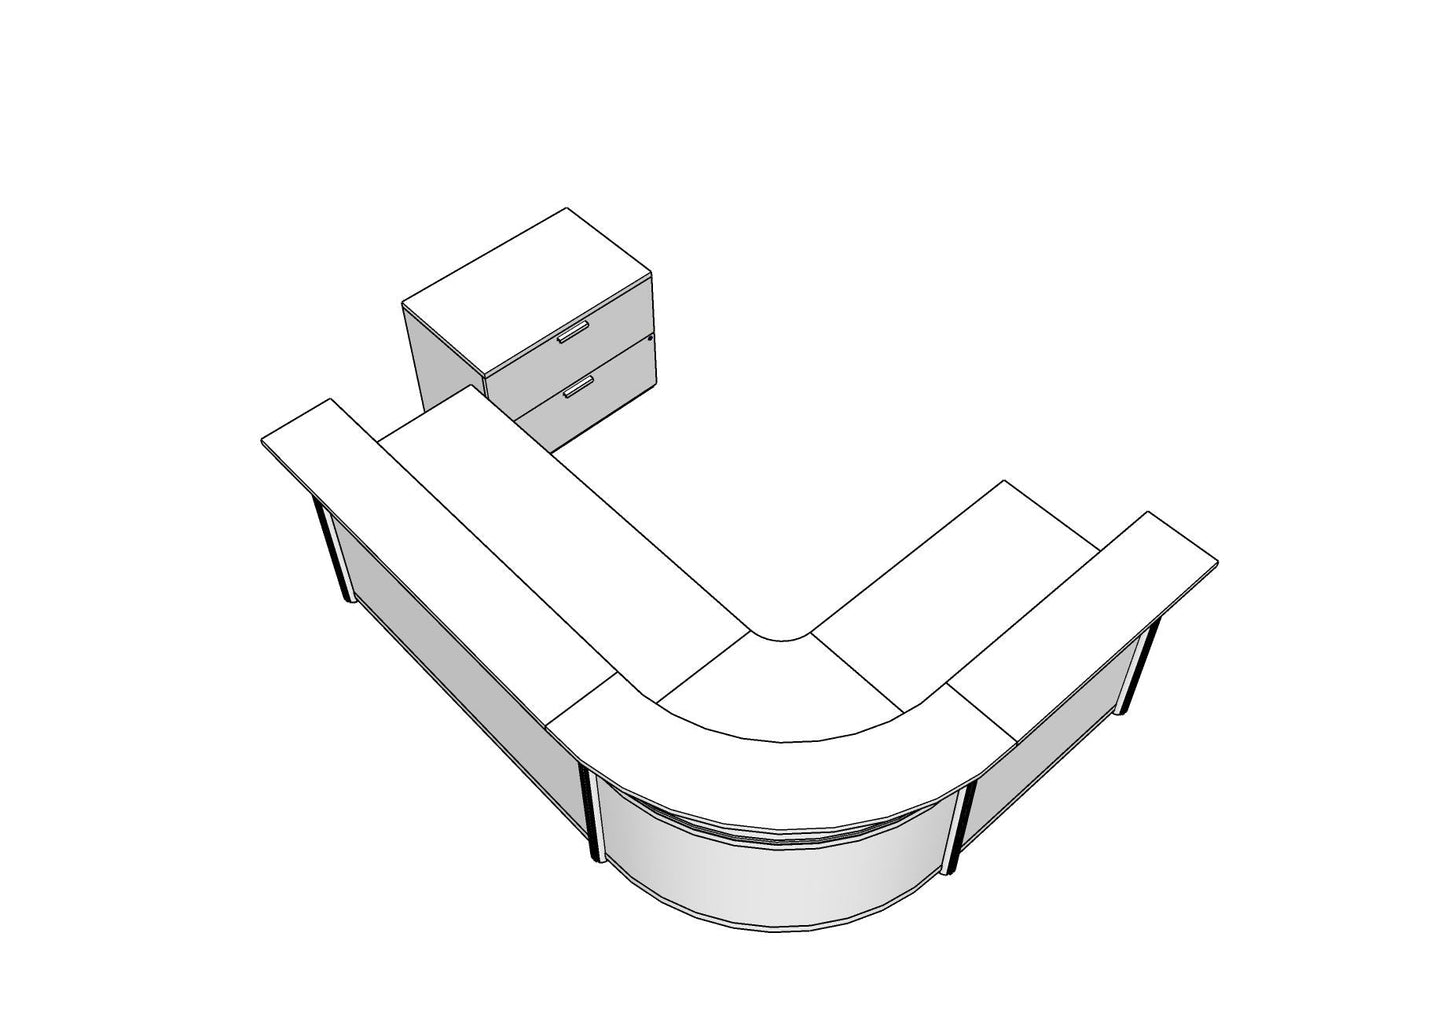 Curved Beam, Corner Reception with Front Curve PBR015